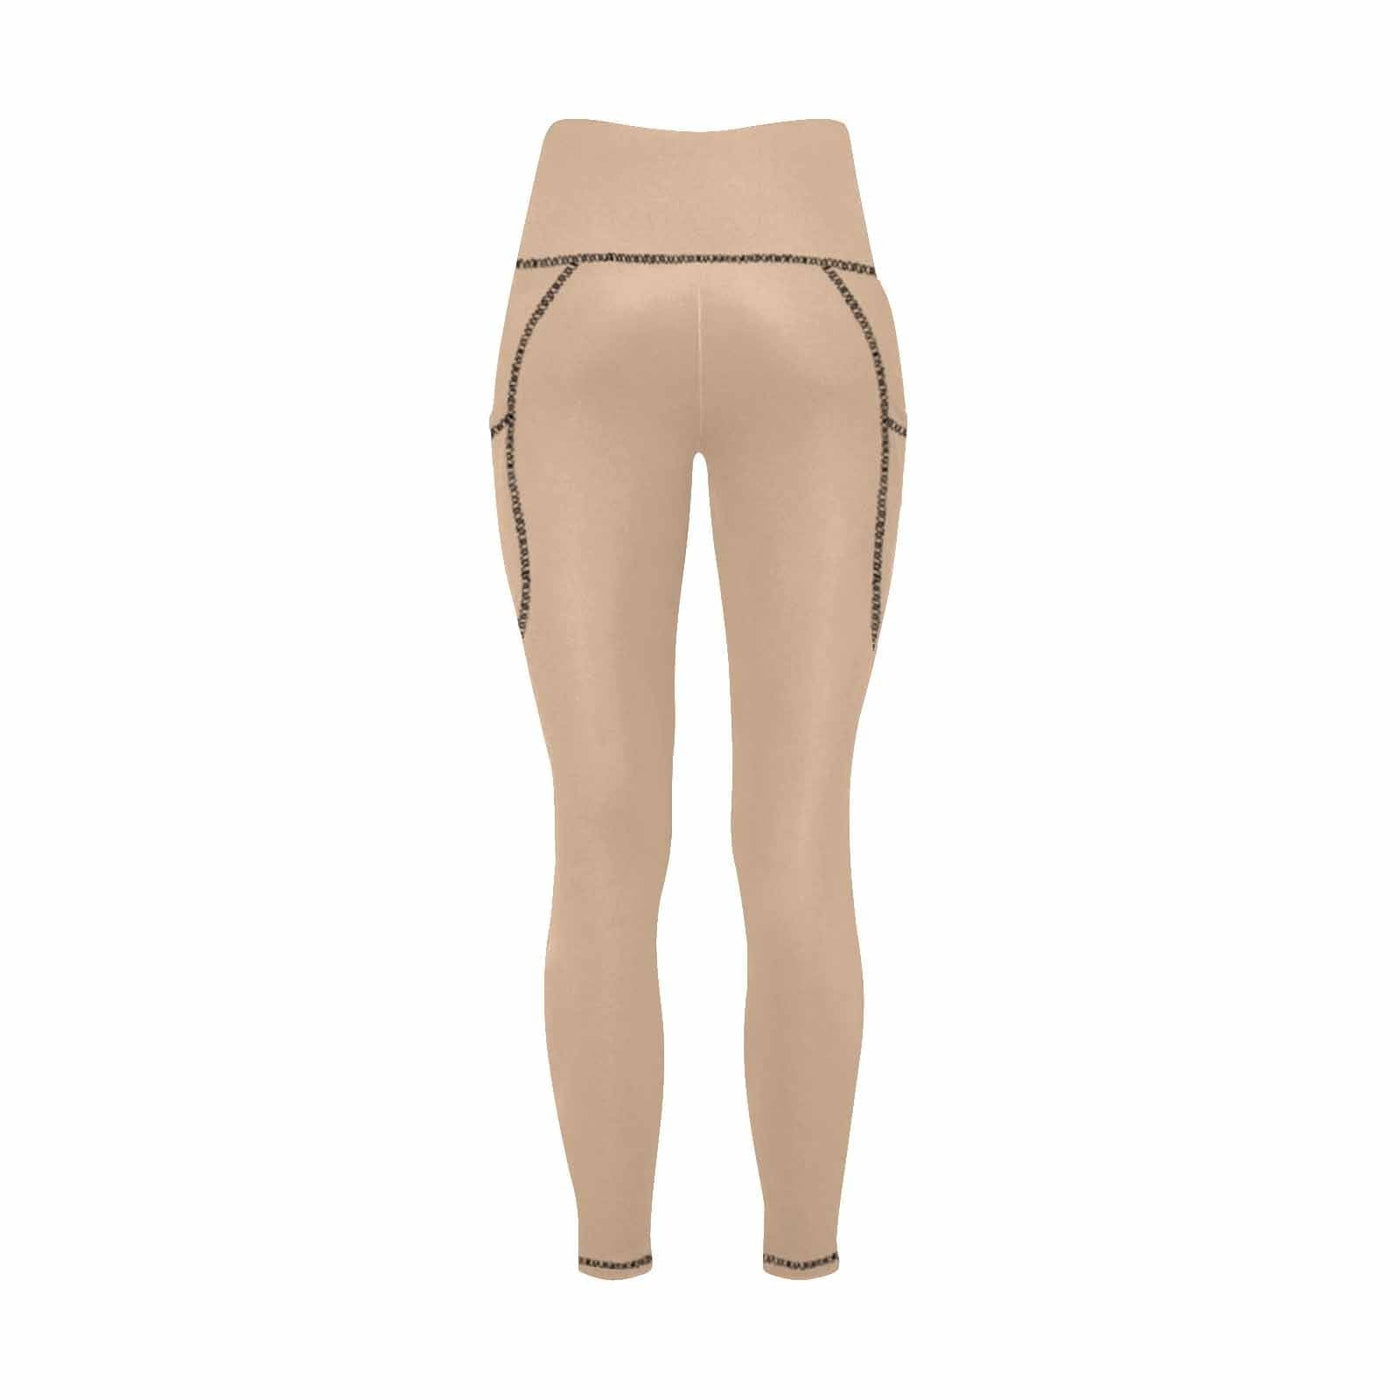 Womens Leggings With Pockets - Fitness Pants / Pale Brown - Womens | Leggings